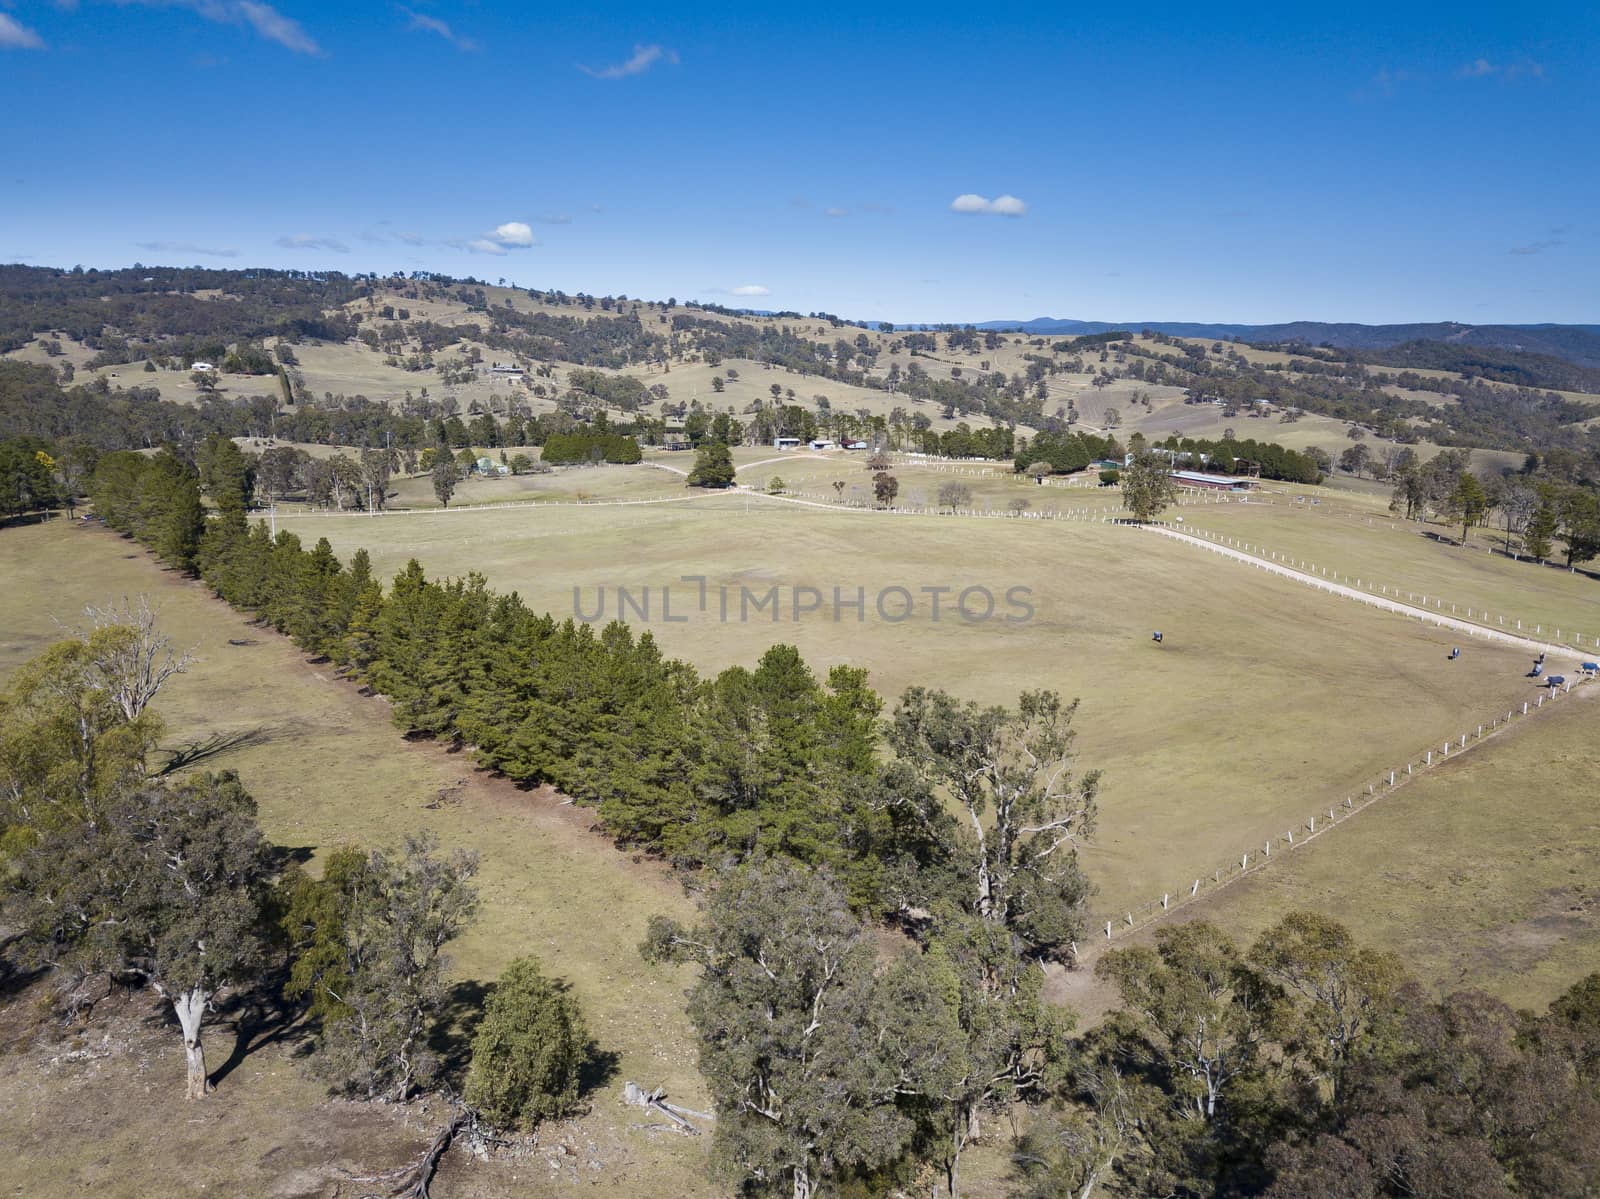 Aerial view of horses in a field in The Blue Mountains in regional Australia by WittkePhotos